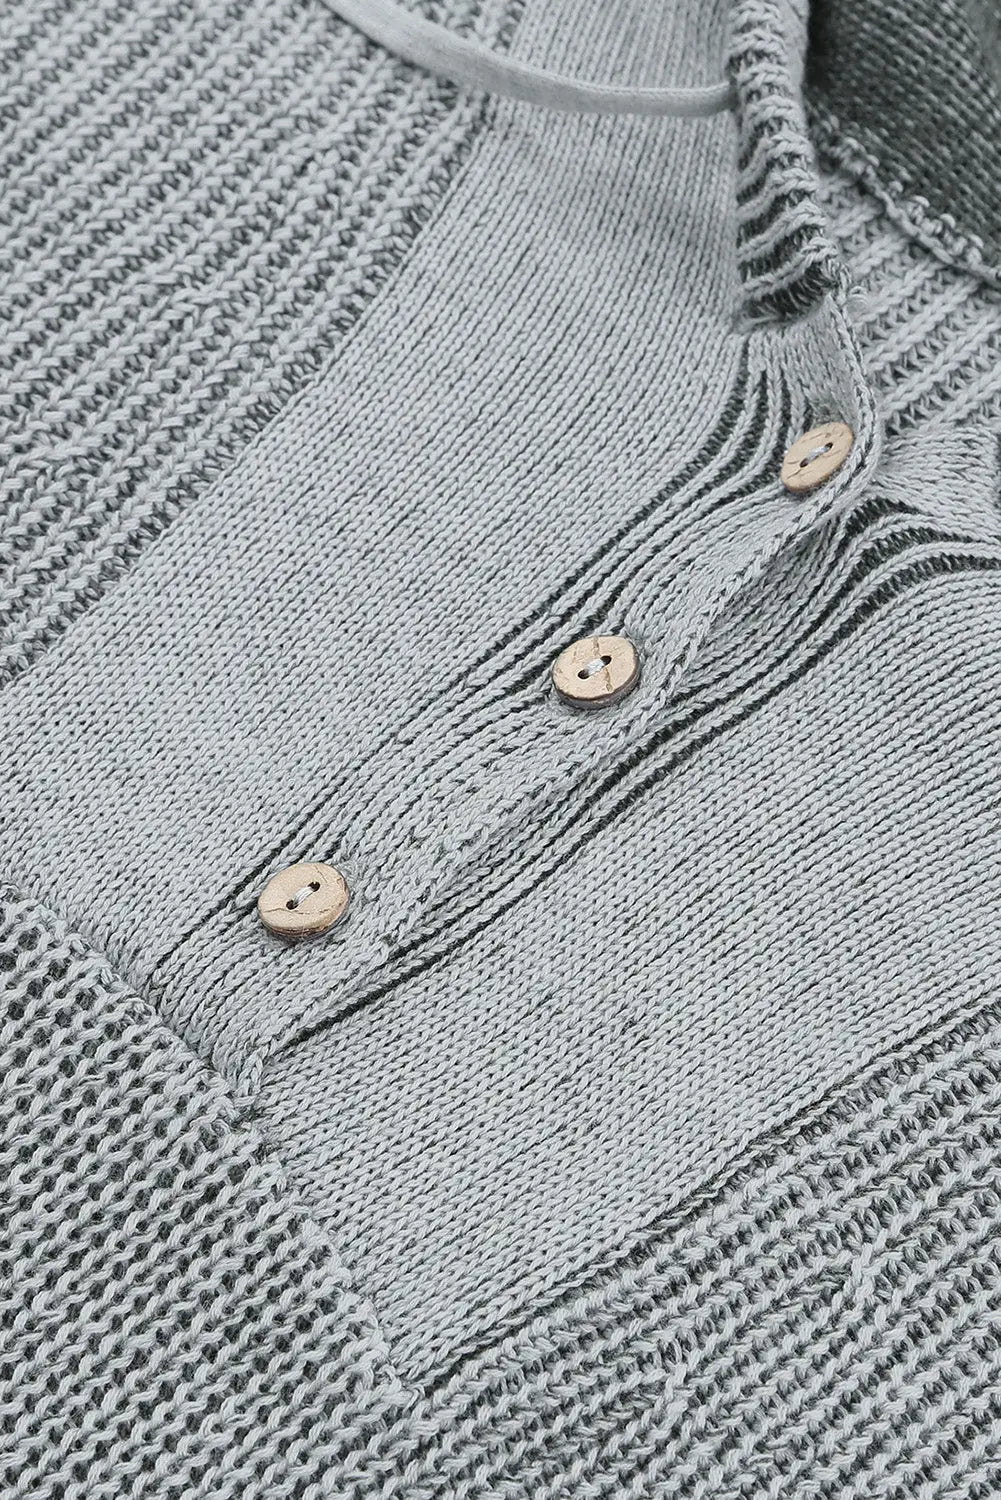 Gray henley v neck hooded sweater - sweaters & cardigans